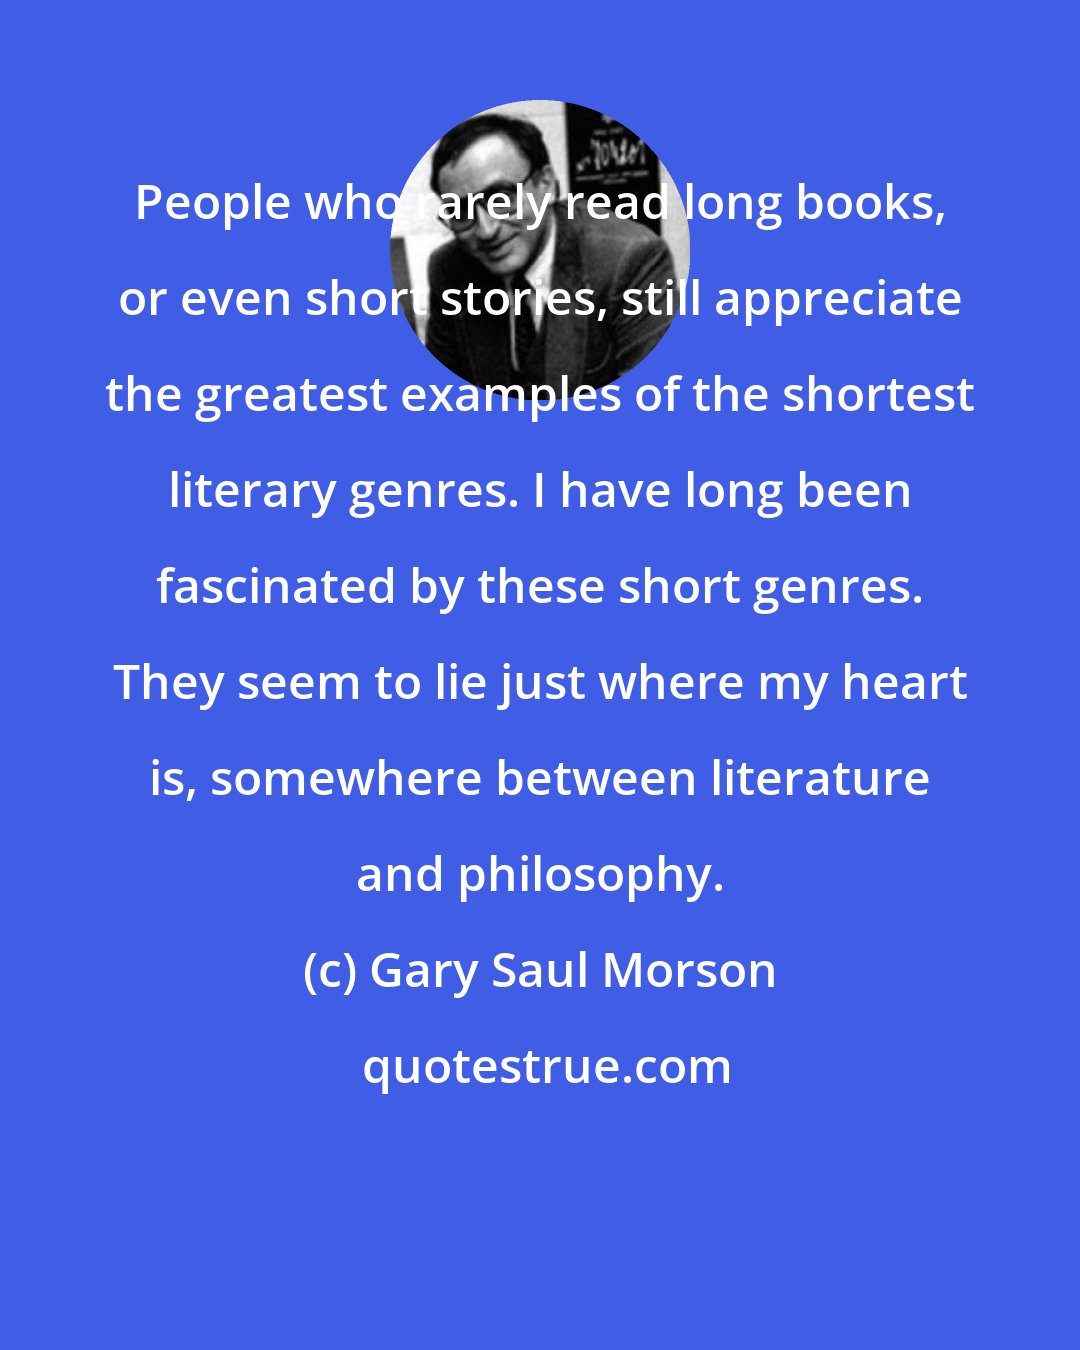 Gary Saul Morson: People who rarely read long books, or even short stories, still appreciate the greatest examples of the shortest literary genres. I have long been fascinated by these short genres. They seem to lie just where my heart is, somewhere between literature and philosophy.